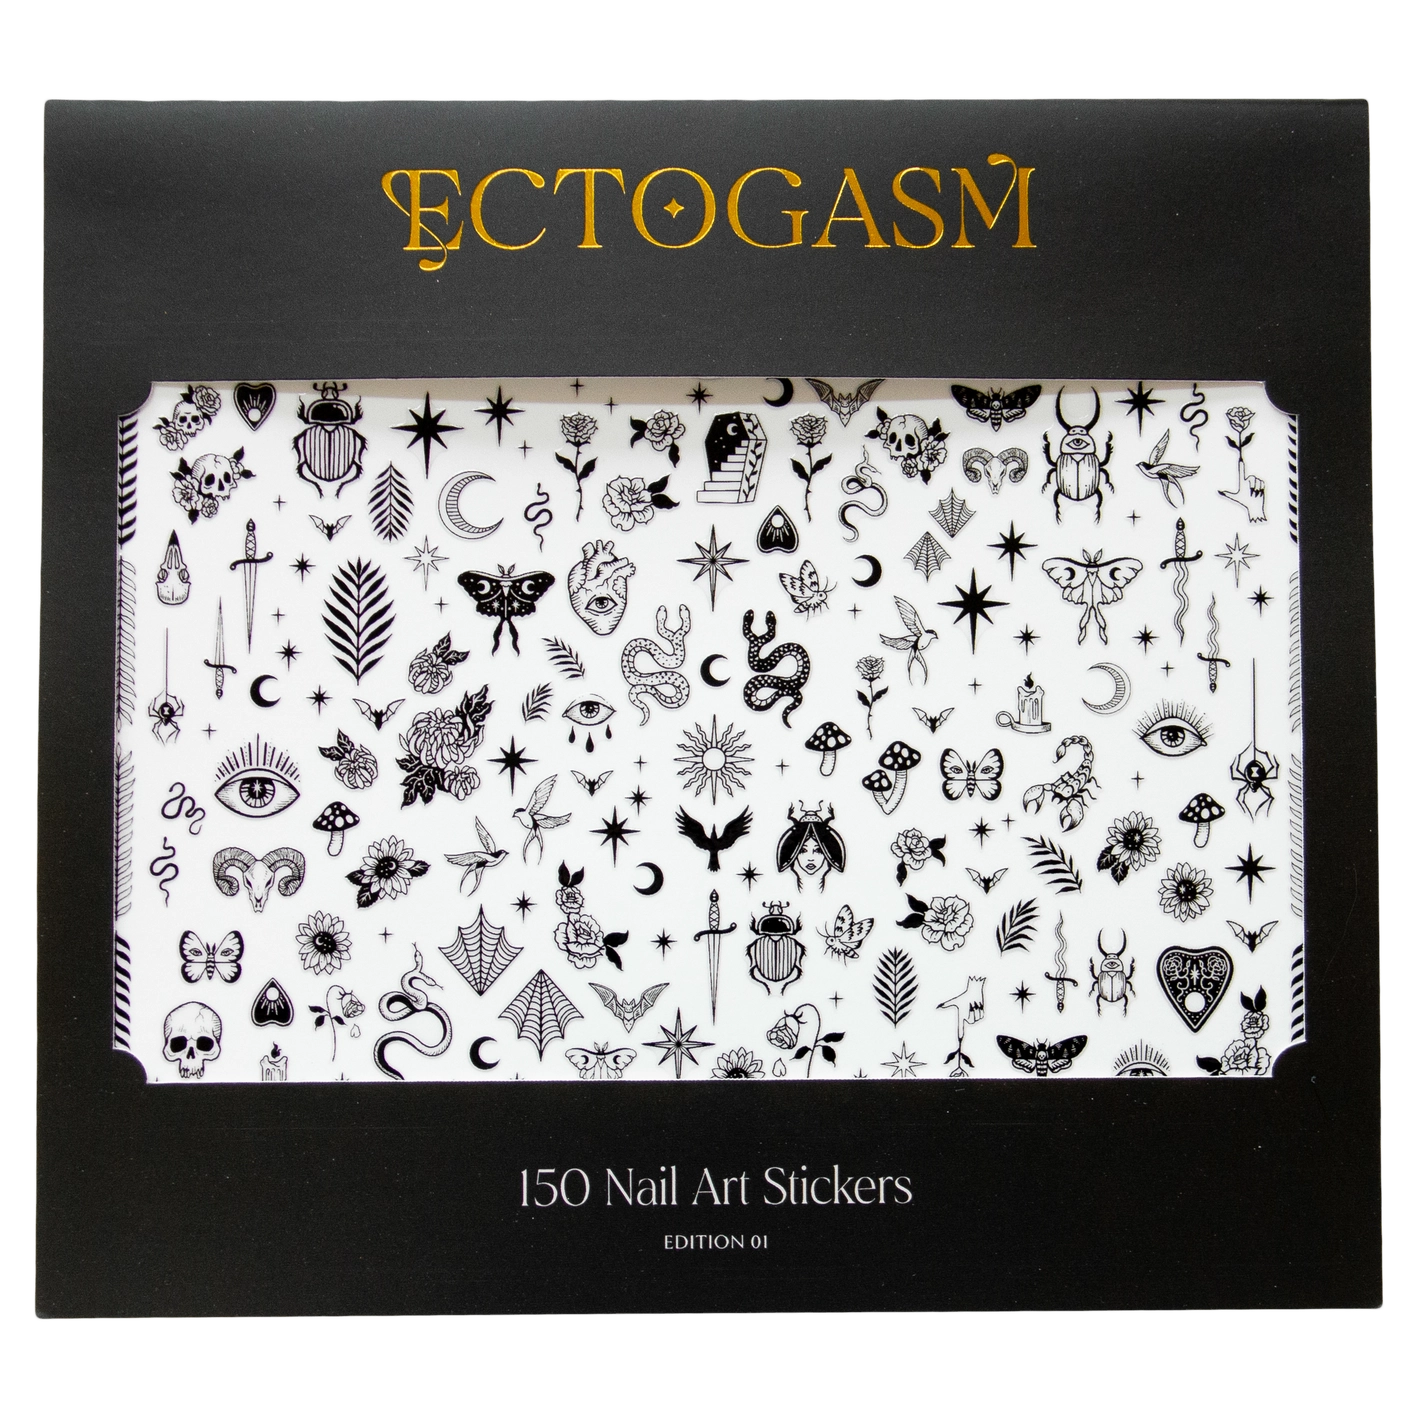 A package of nail decals by the brand Ectogasm in their black cardboard packaging